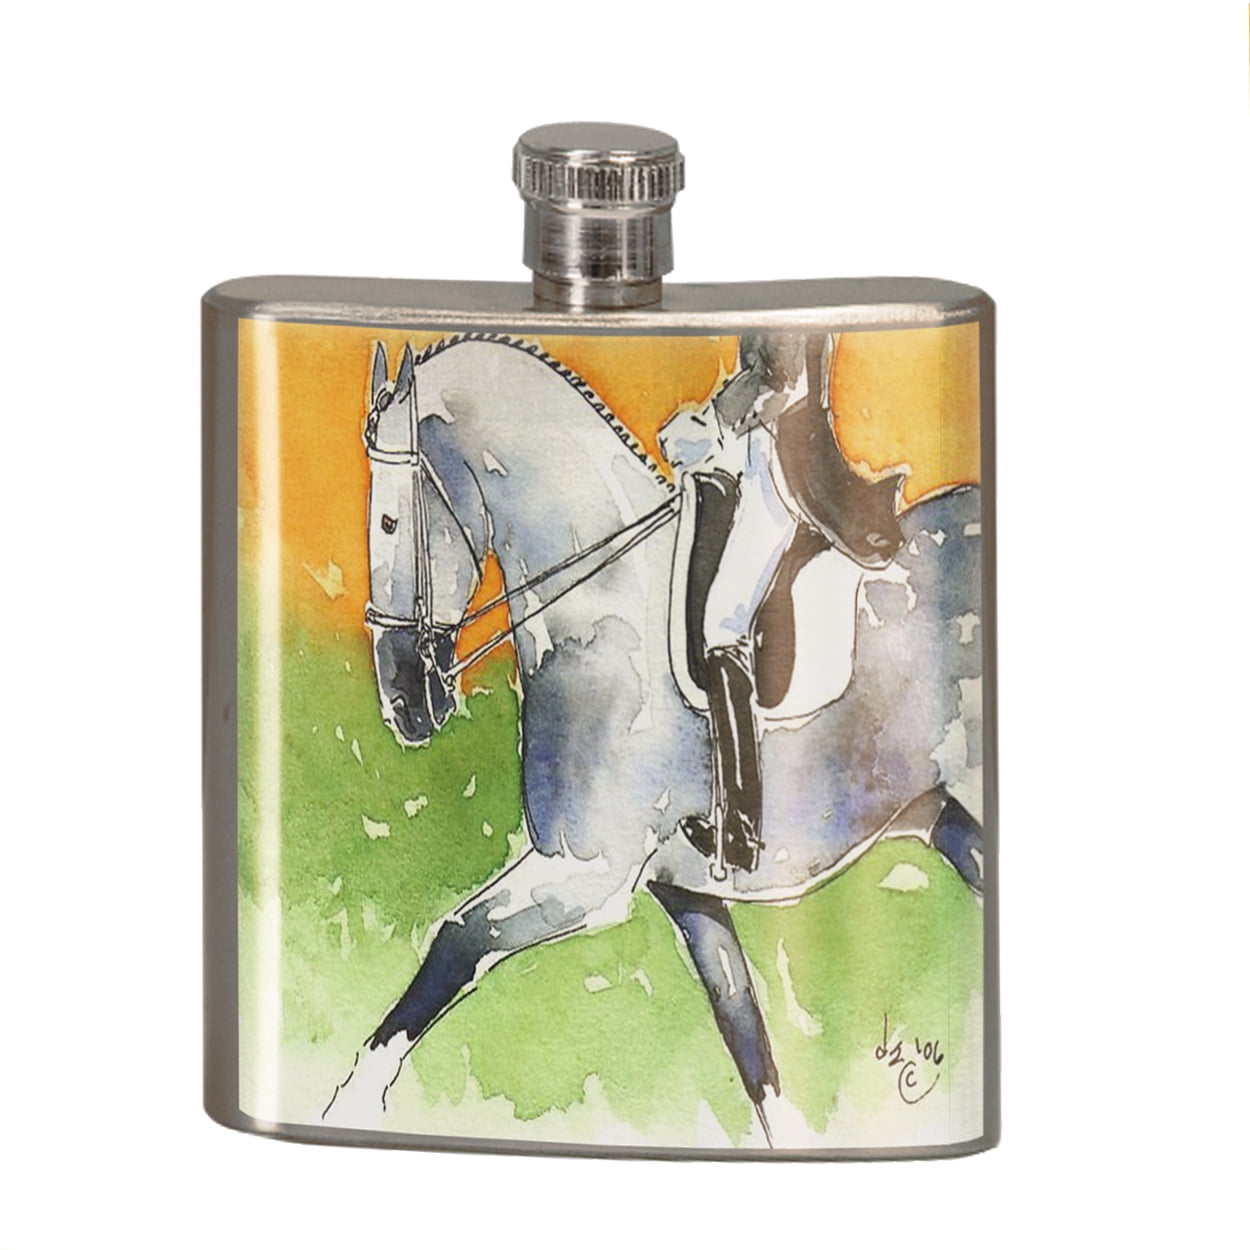 Horse rider and jockey stainless steel & English pewter hip flask 6oz gift boxed 